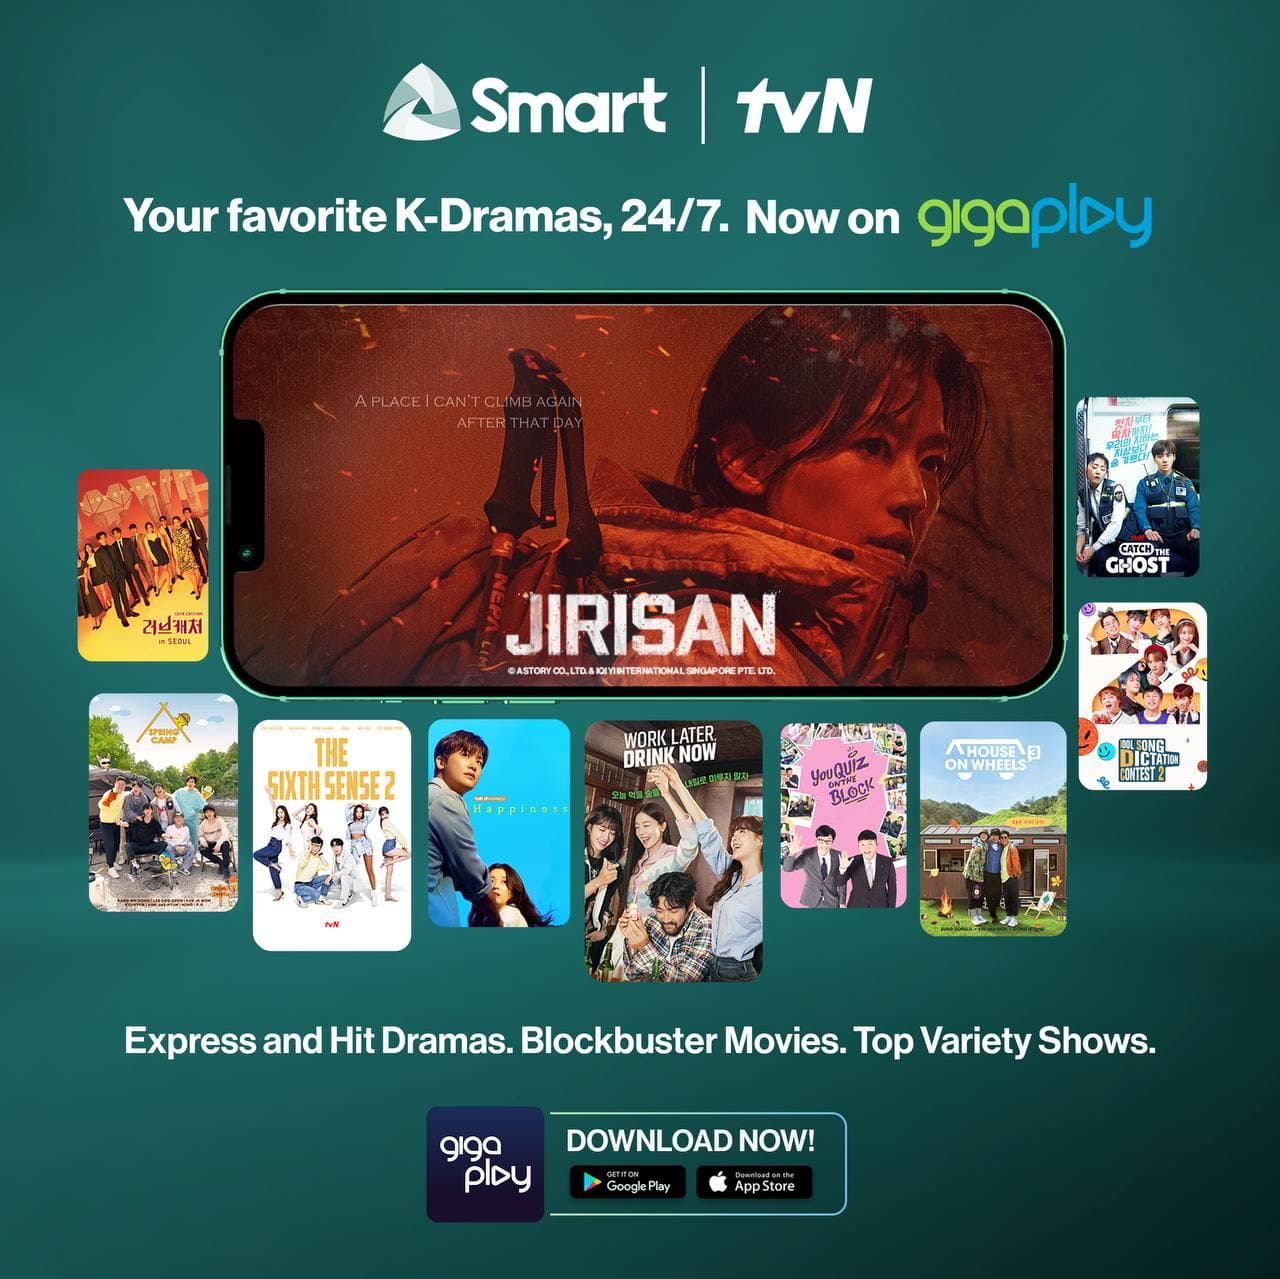 Premier K-channel tvN now exclusively on Smart’s GigaPlay: Experience a suite of K-dramas right at your fingertips